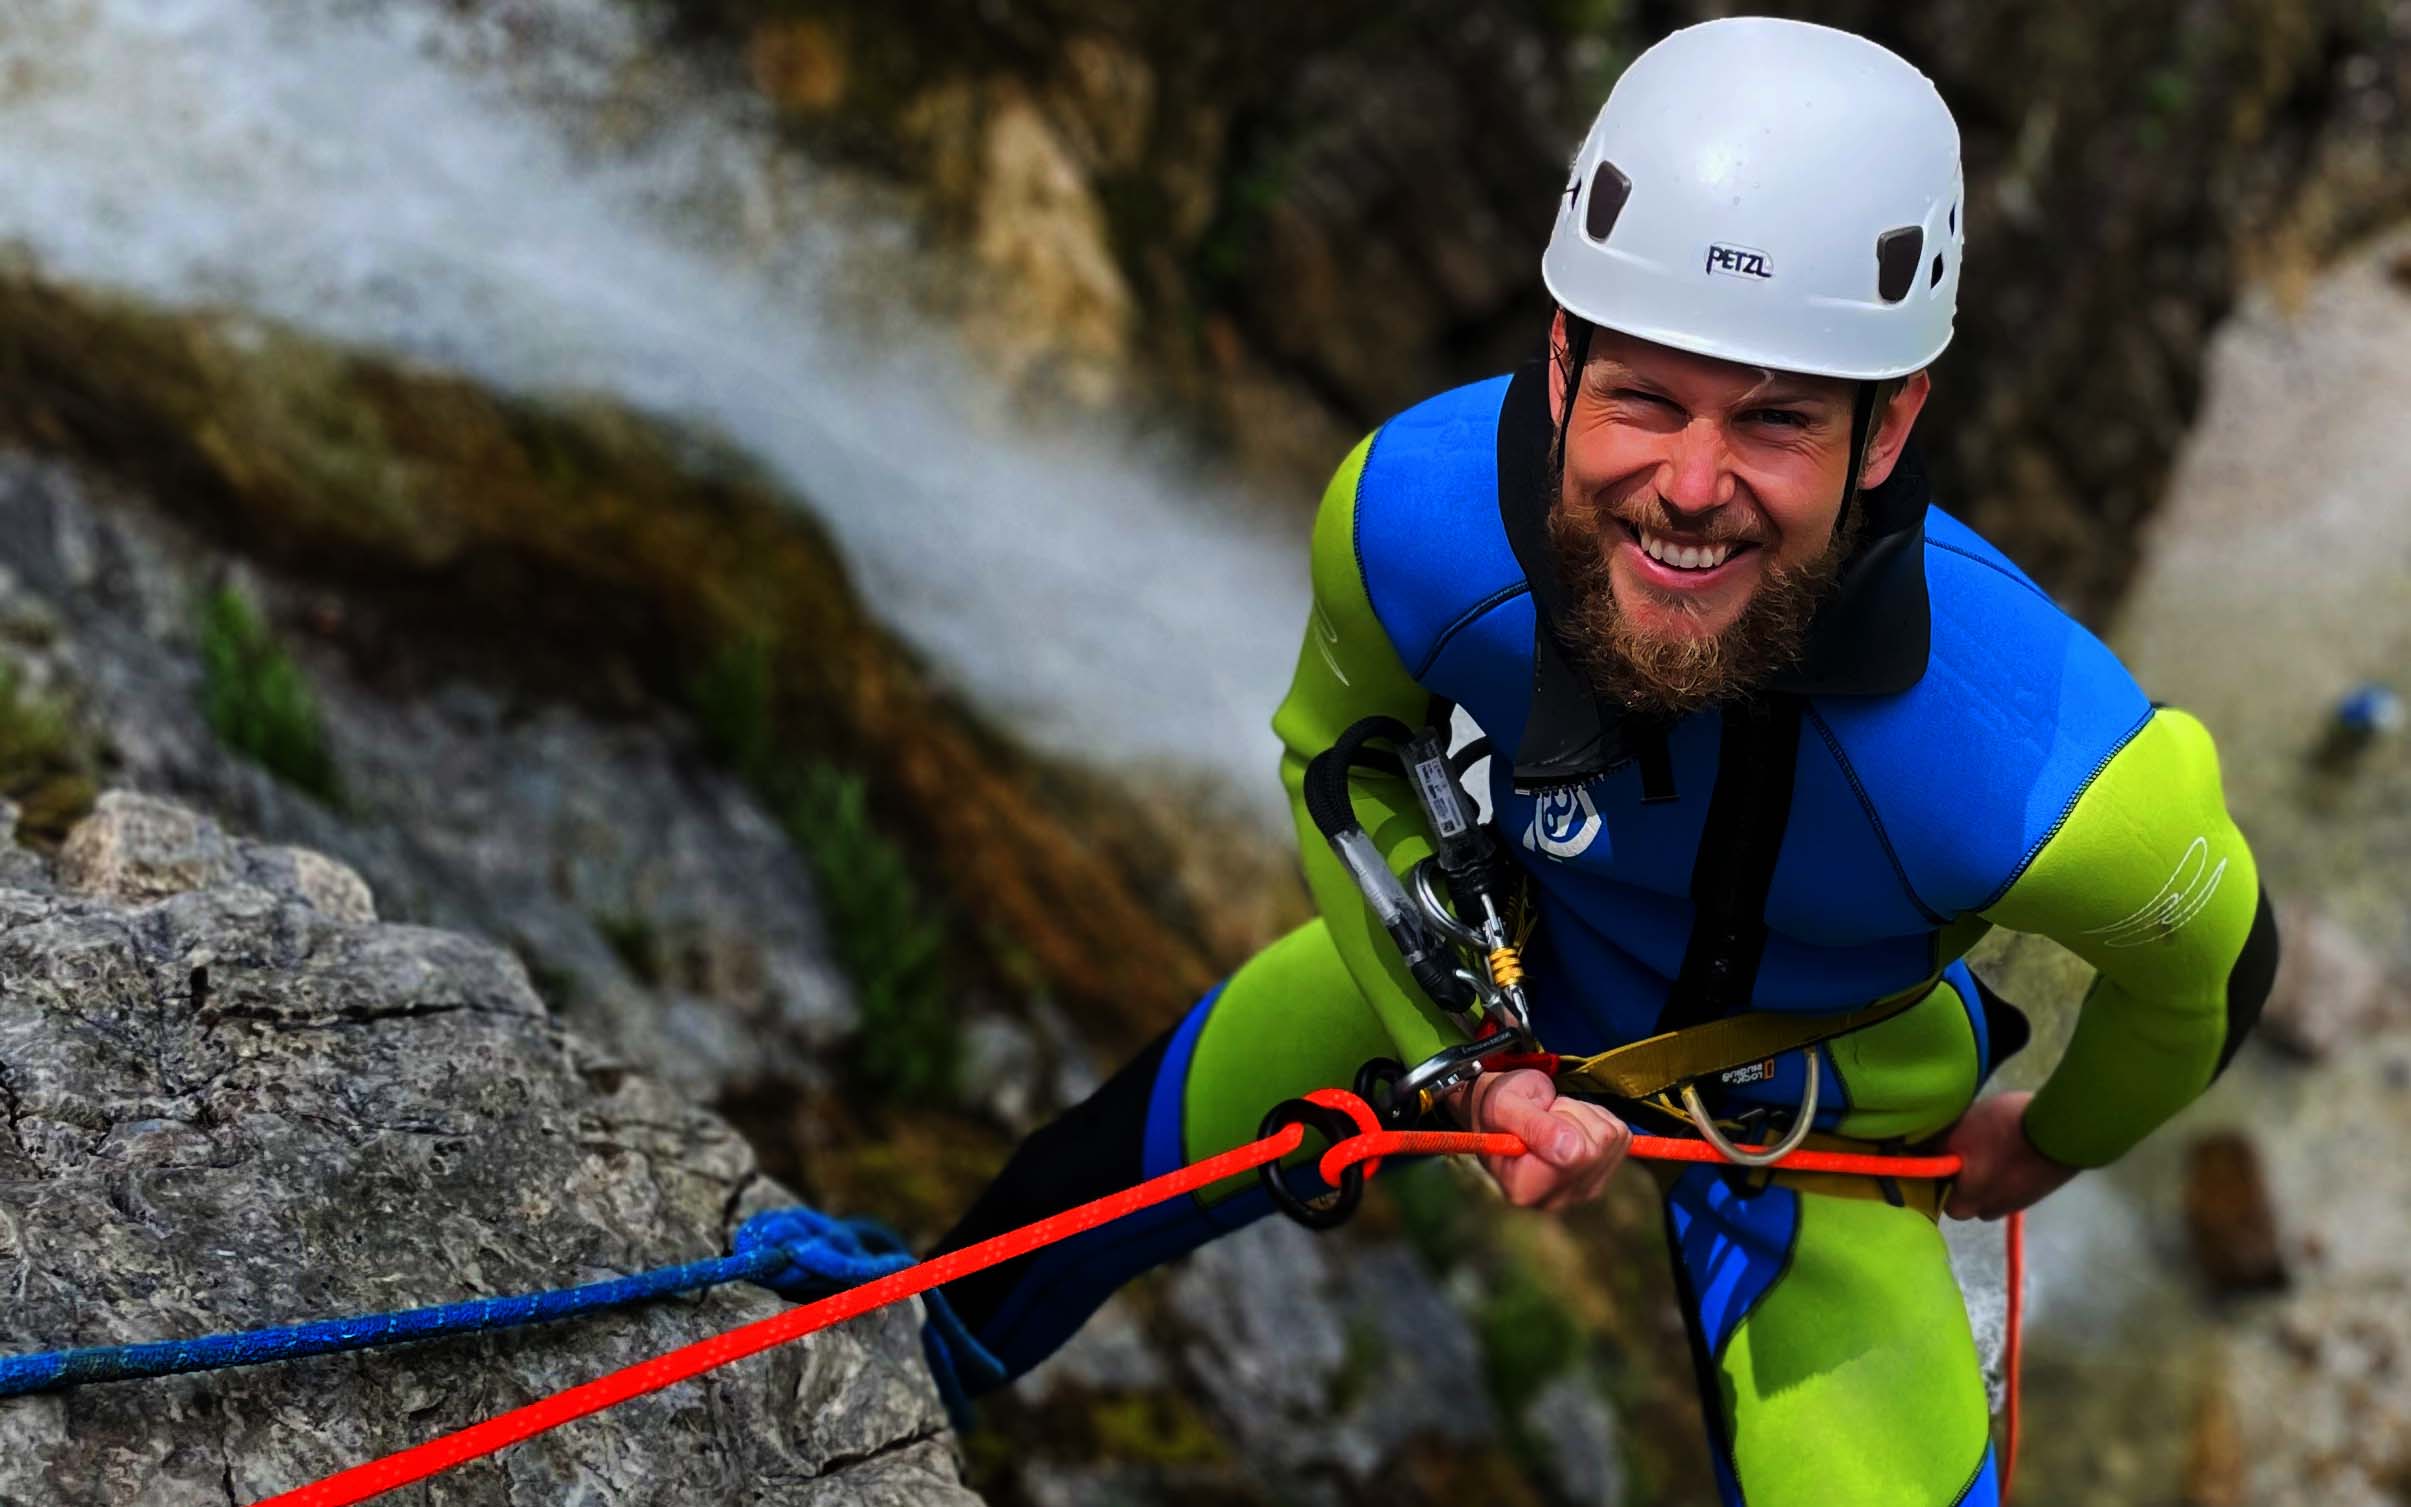 Canyoning Slovenia: We Wet Your Pants Like No Other!